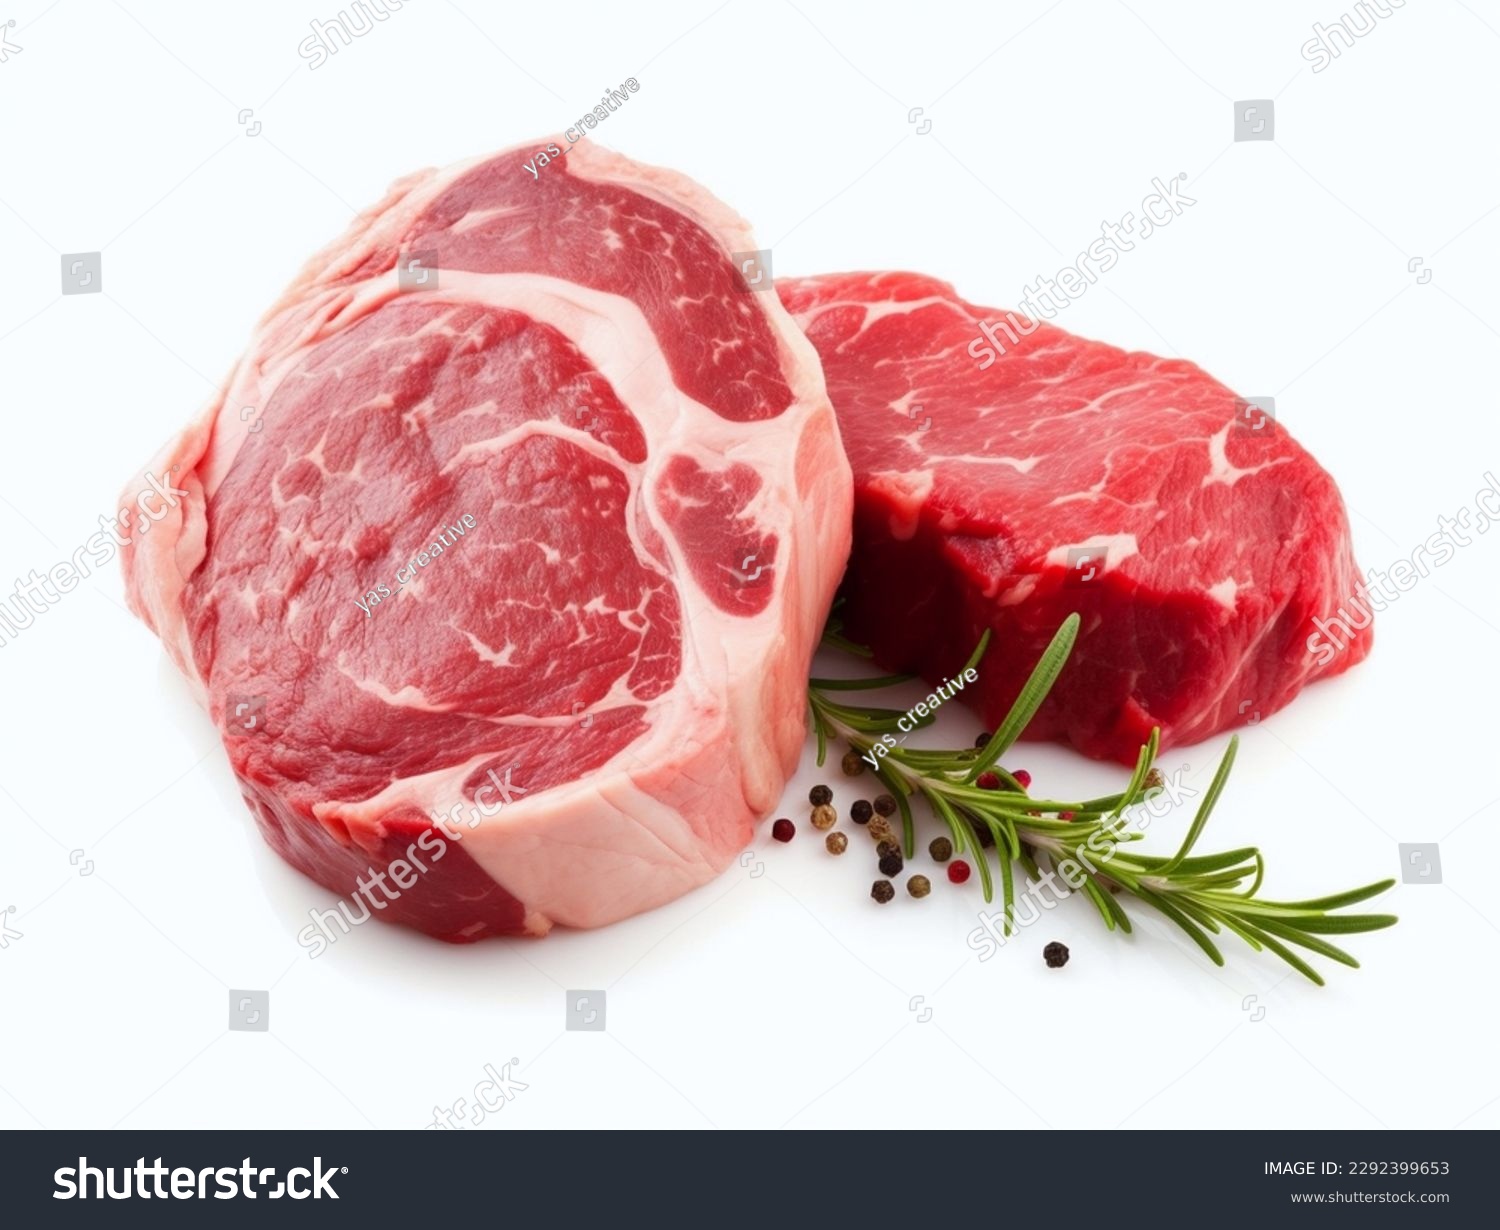 Raw beef steak with rosemary and peppercorns on white background #2292399653